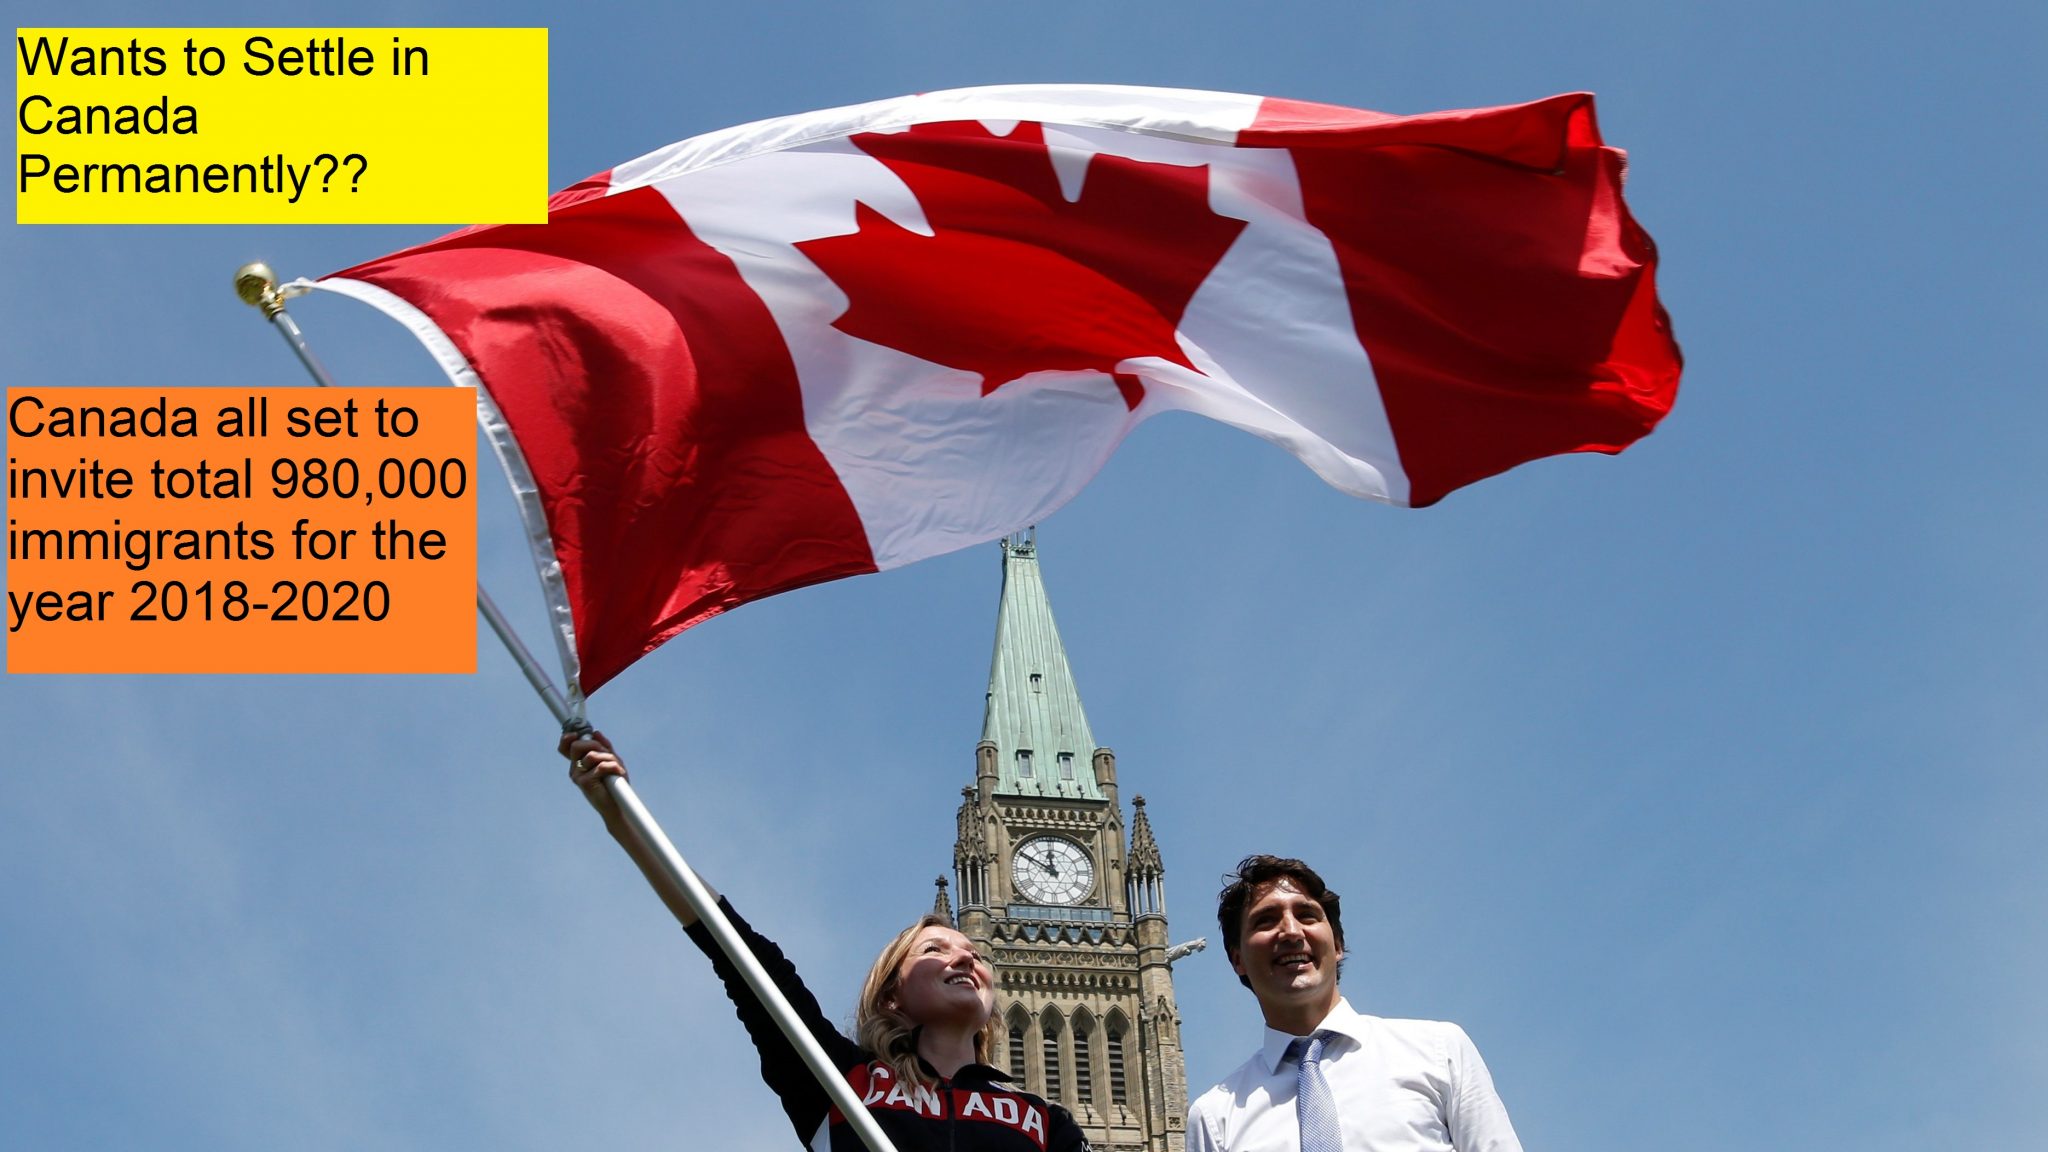 Canada all set to invite new immigrants for the year 2018-2020